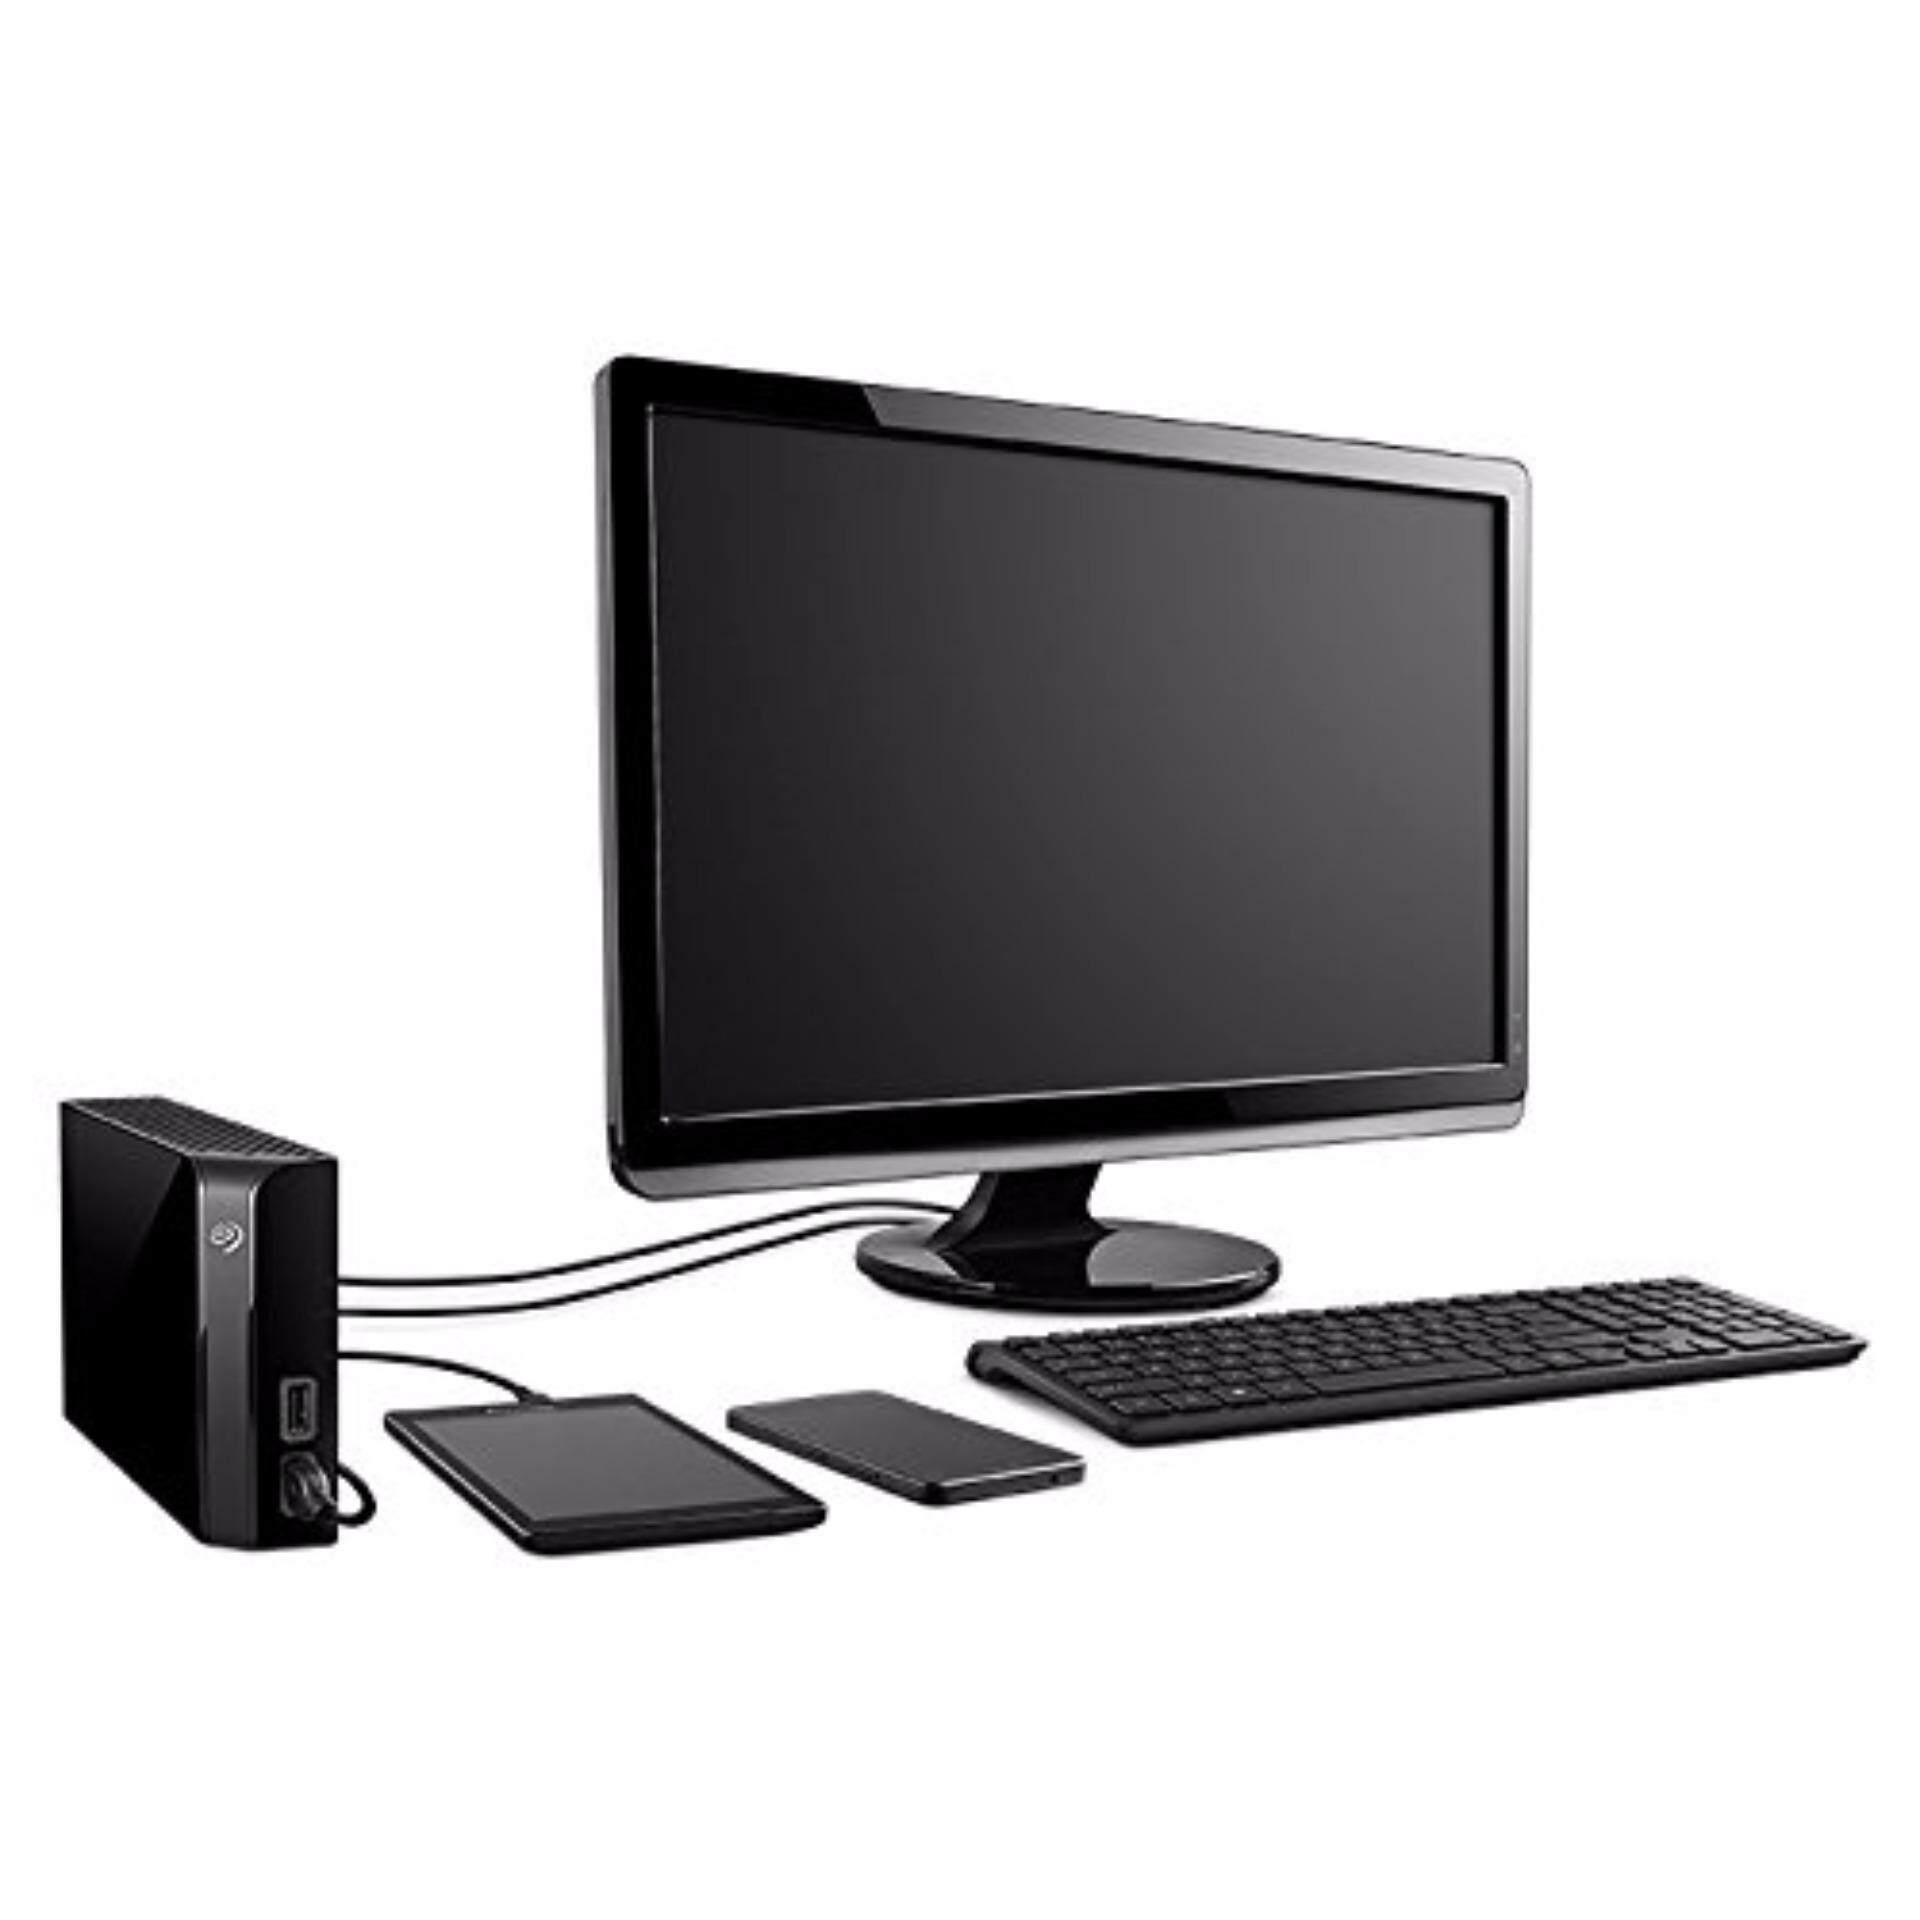 Seagate Backup Plus Desktop Hub 12TB (Up to 160 MB/s) with Integrated USB 3.0 Back up & Charge Hub Downloadable Seagate Backup Software Mac & Windows Compatible external hard disk